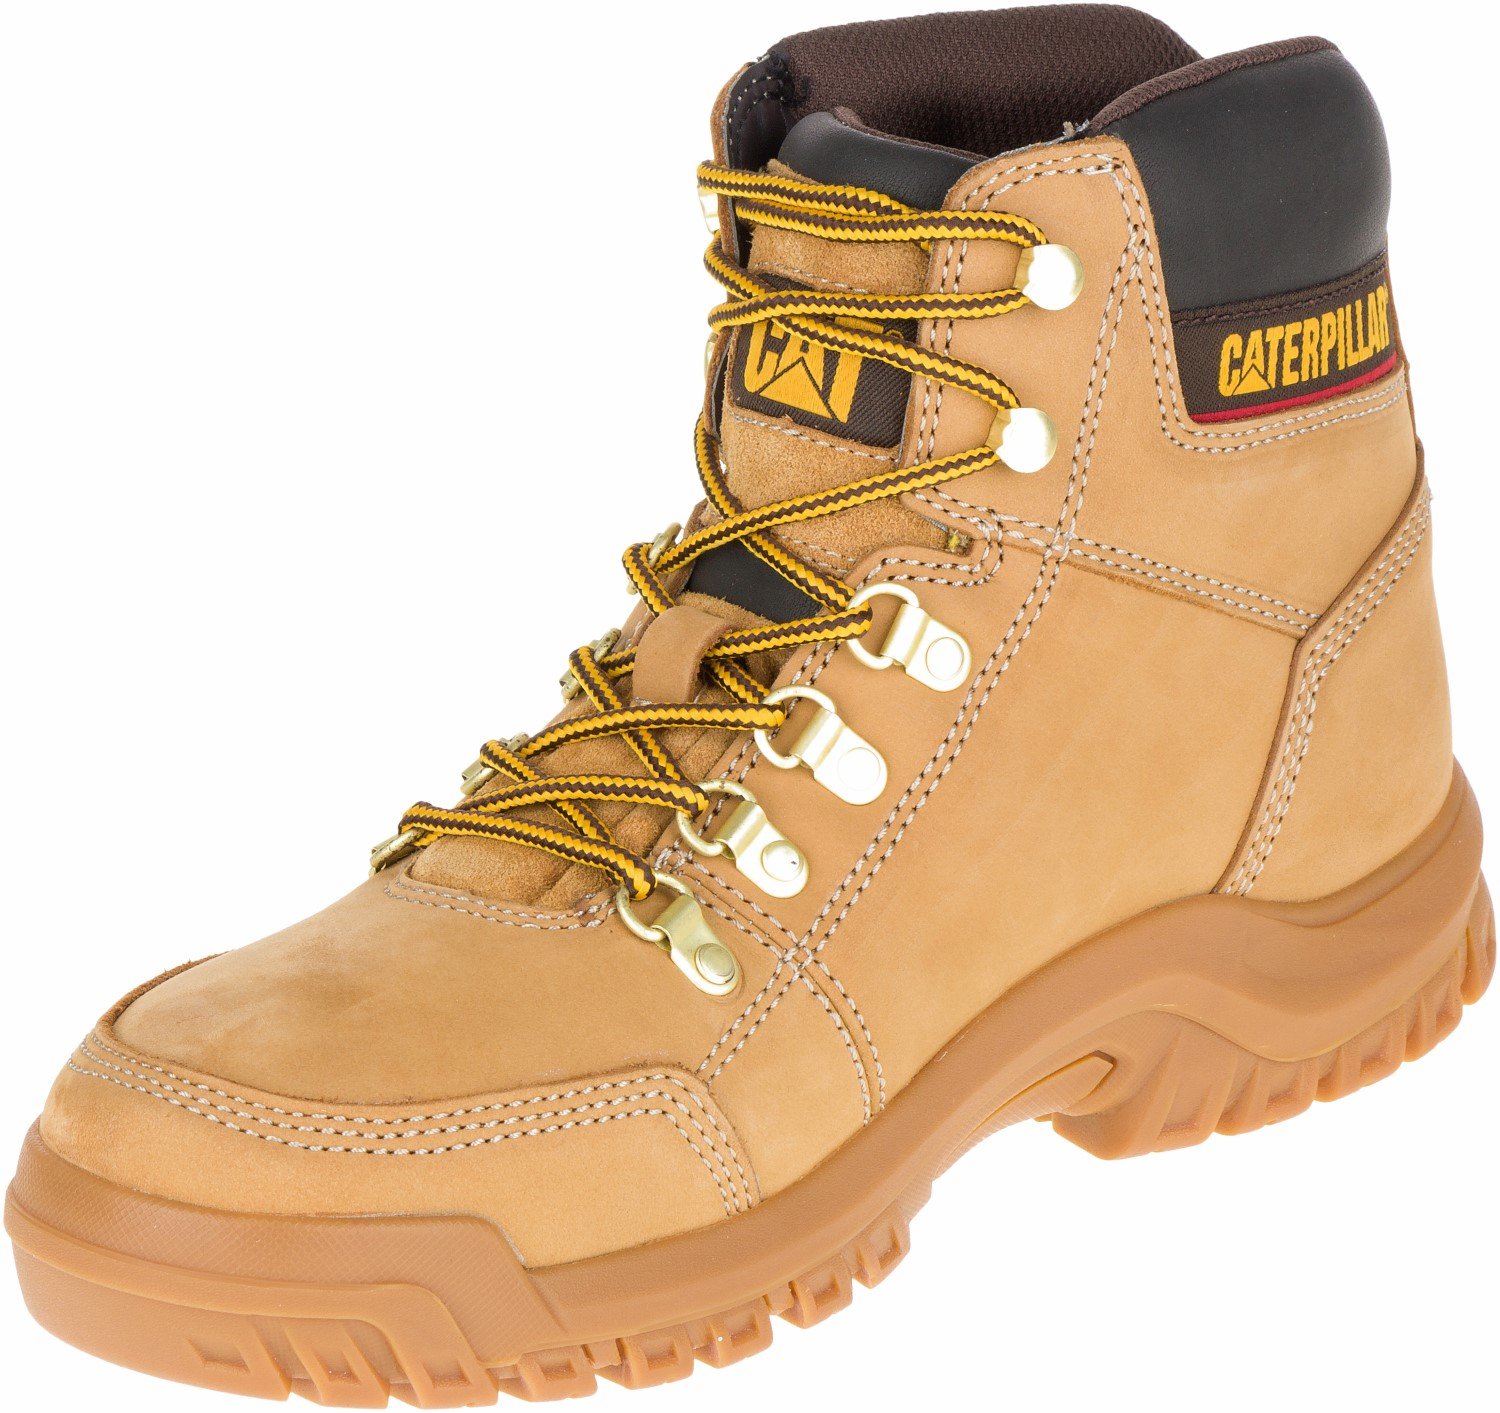 Buy > lightest womens hiking boots > in stock